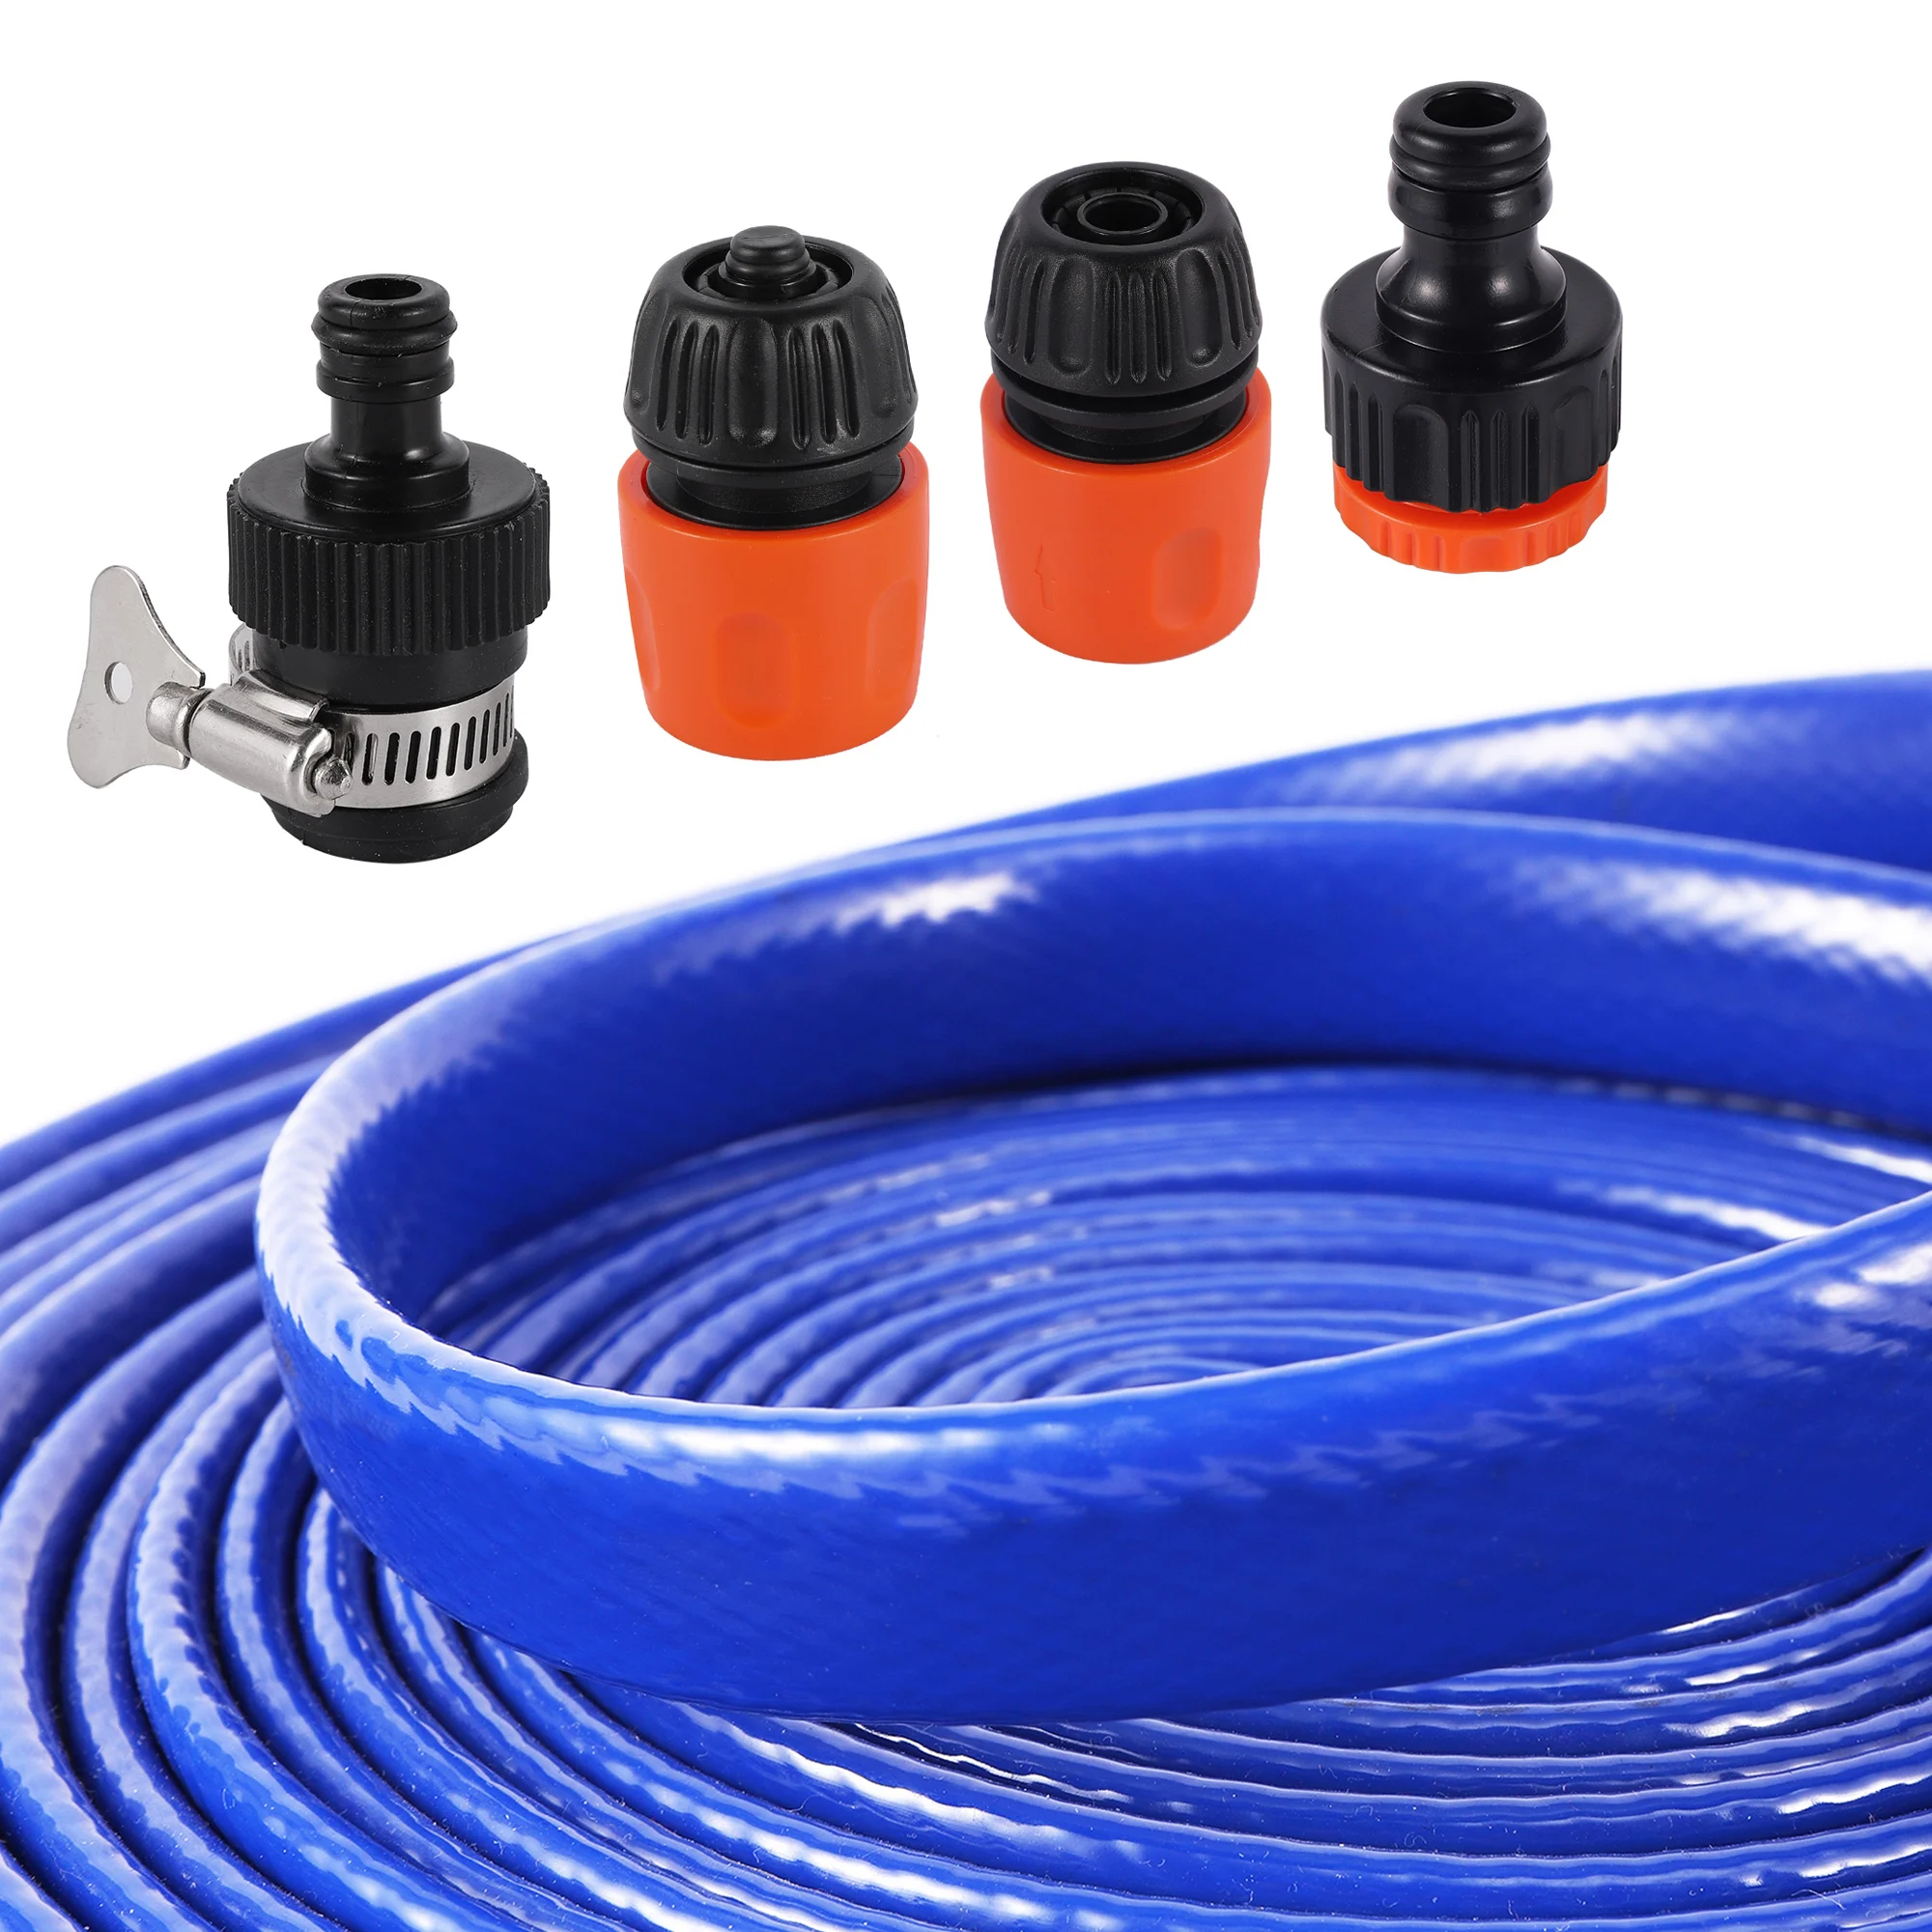 

Garden Hose Quick Connector 1/2" Pipe Coupler Water Connector 12/16mm Antifreeze Tube Repair Extension Joint Irrigation System